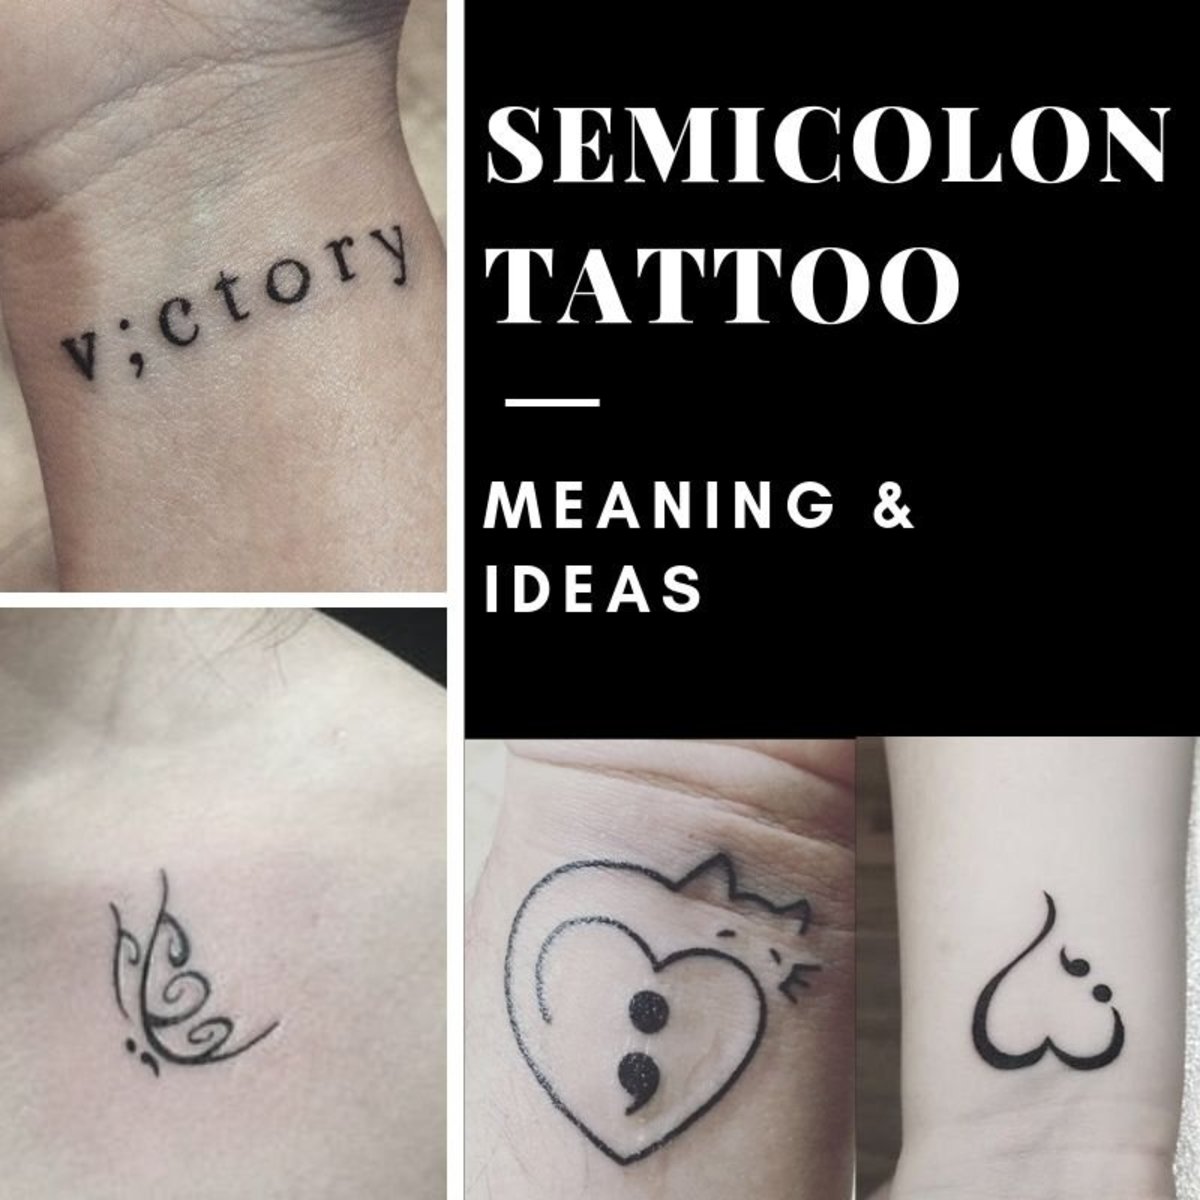 Semicolon Tattoo Meaning, Ideas, and Pictures